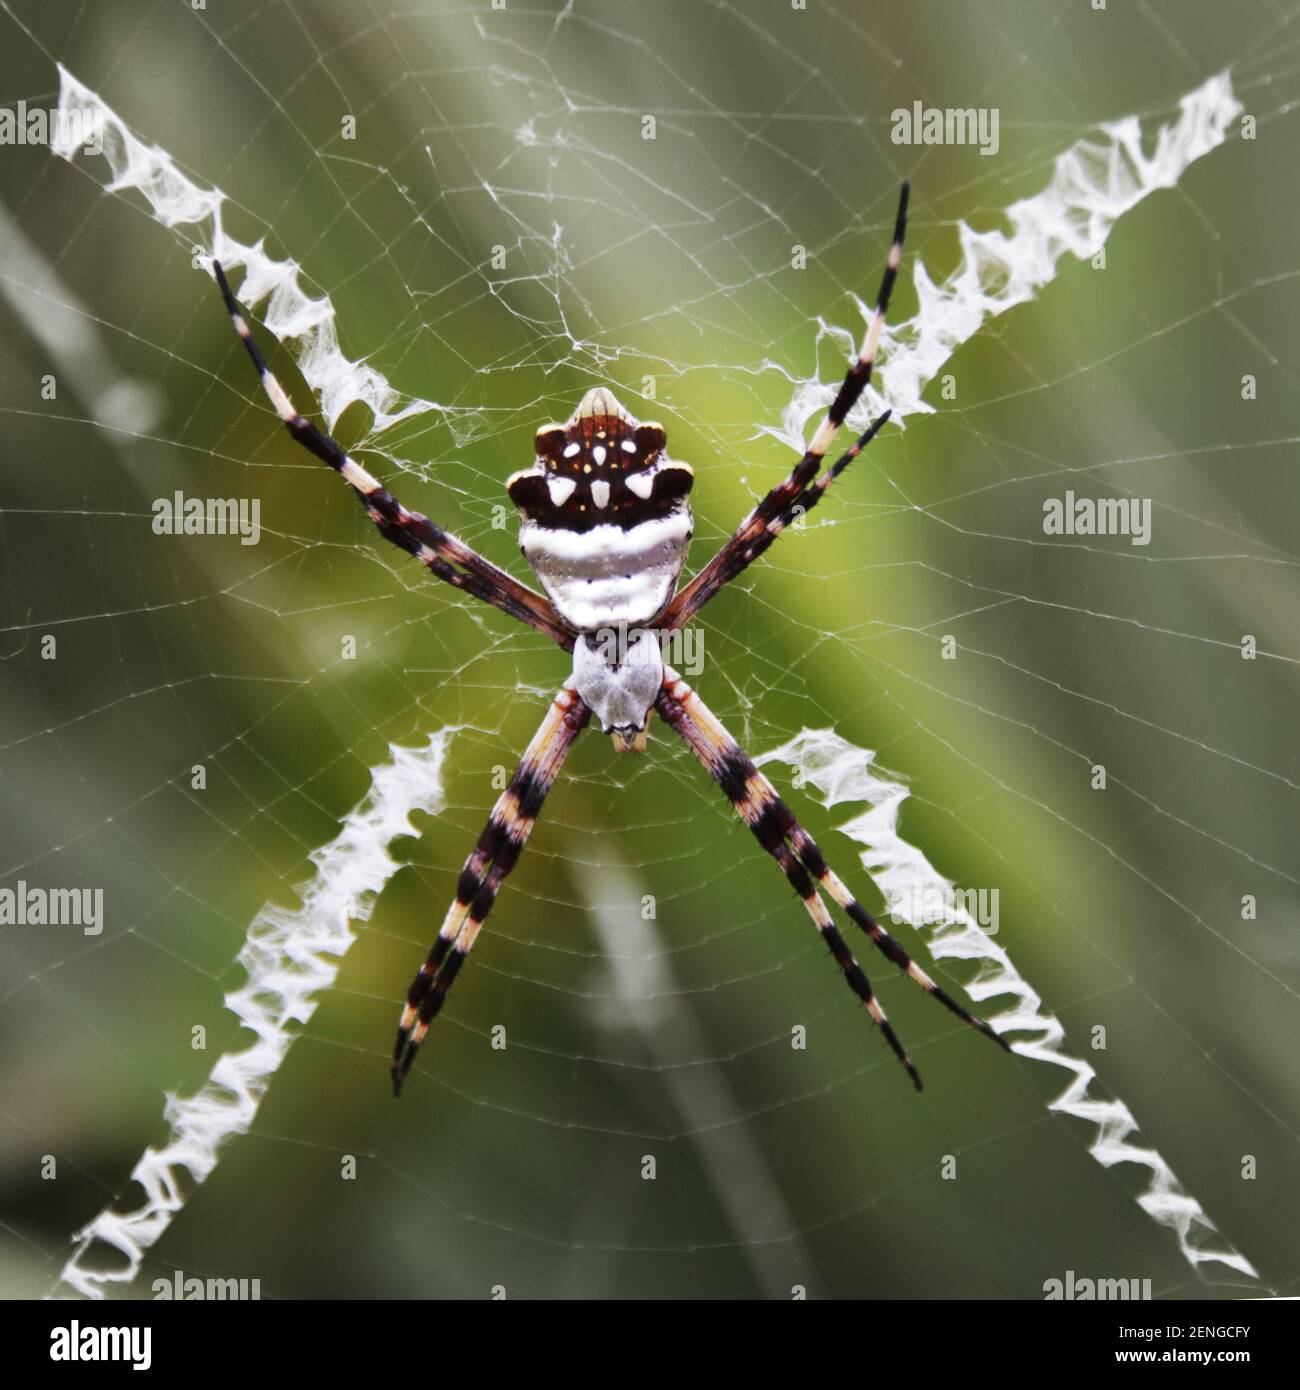 An Argiope argentata spider in a web Stock Photo